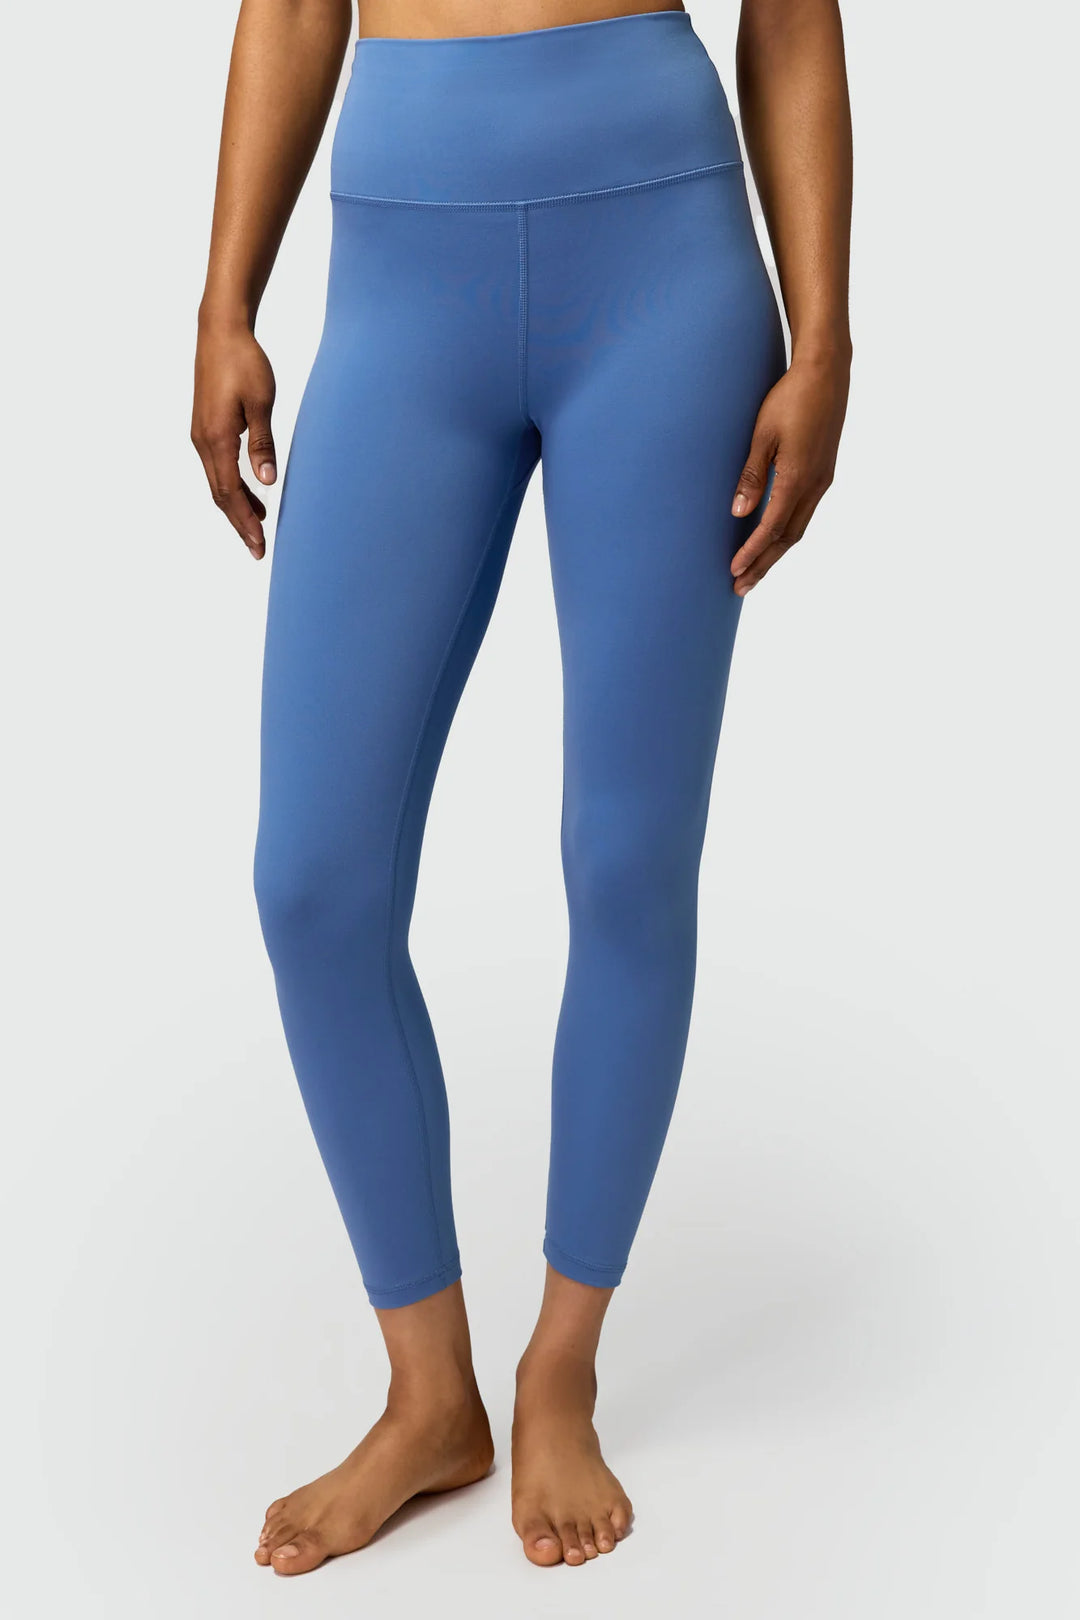 Spiritual Gangster Everly Cinched Waist Legging - Pacific Blue - Sun Diego Boardshop